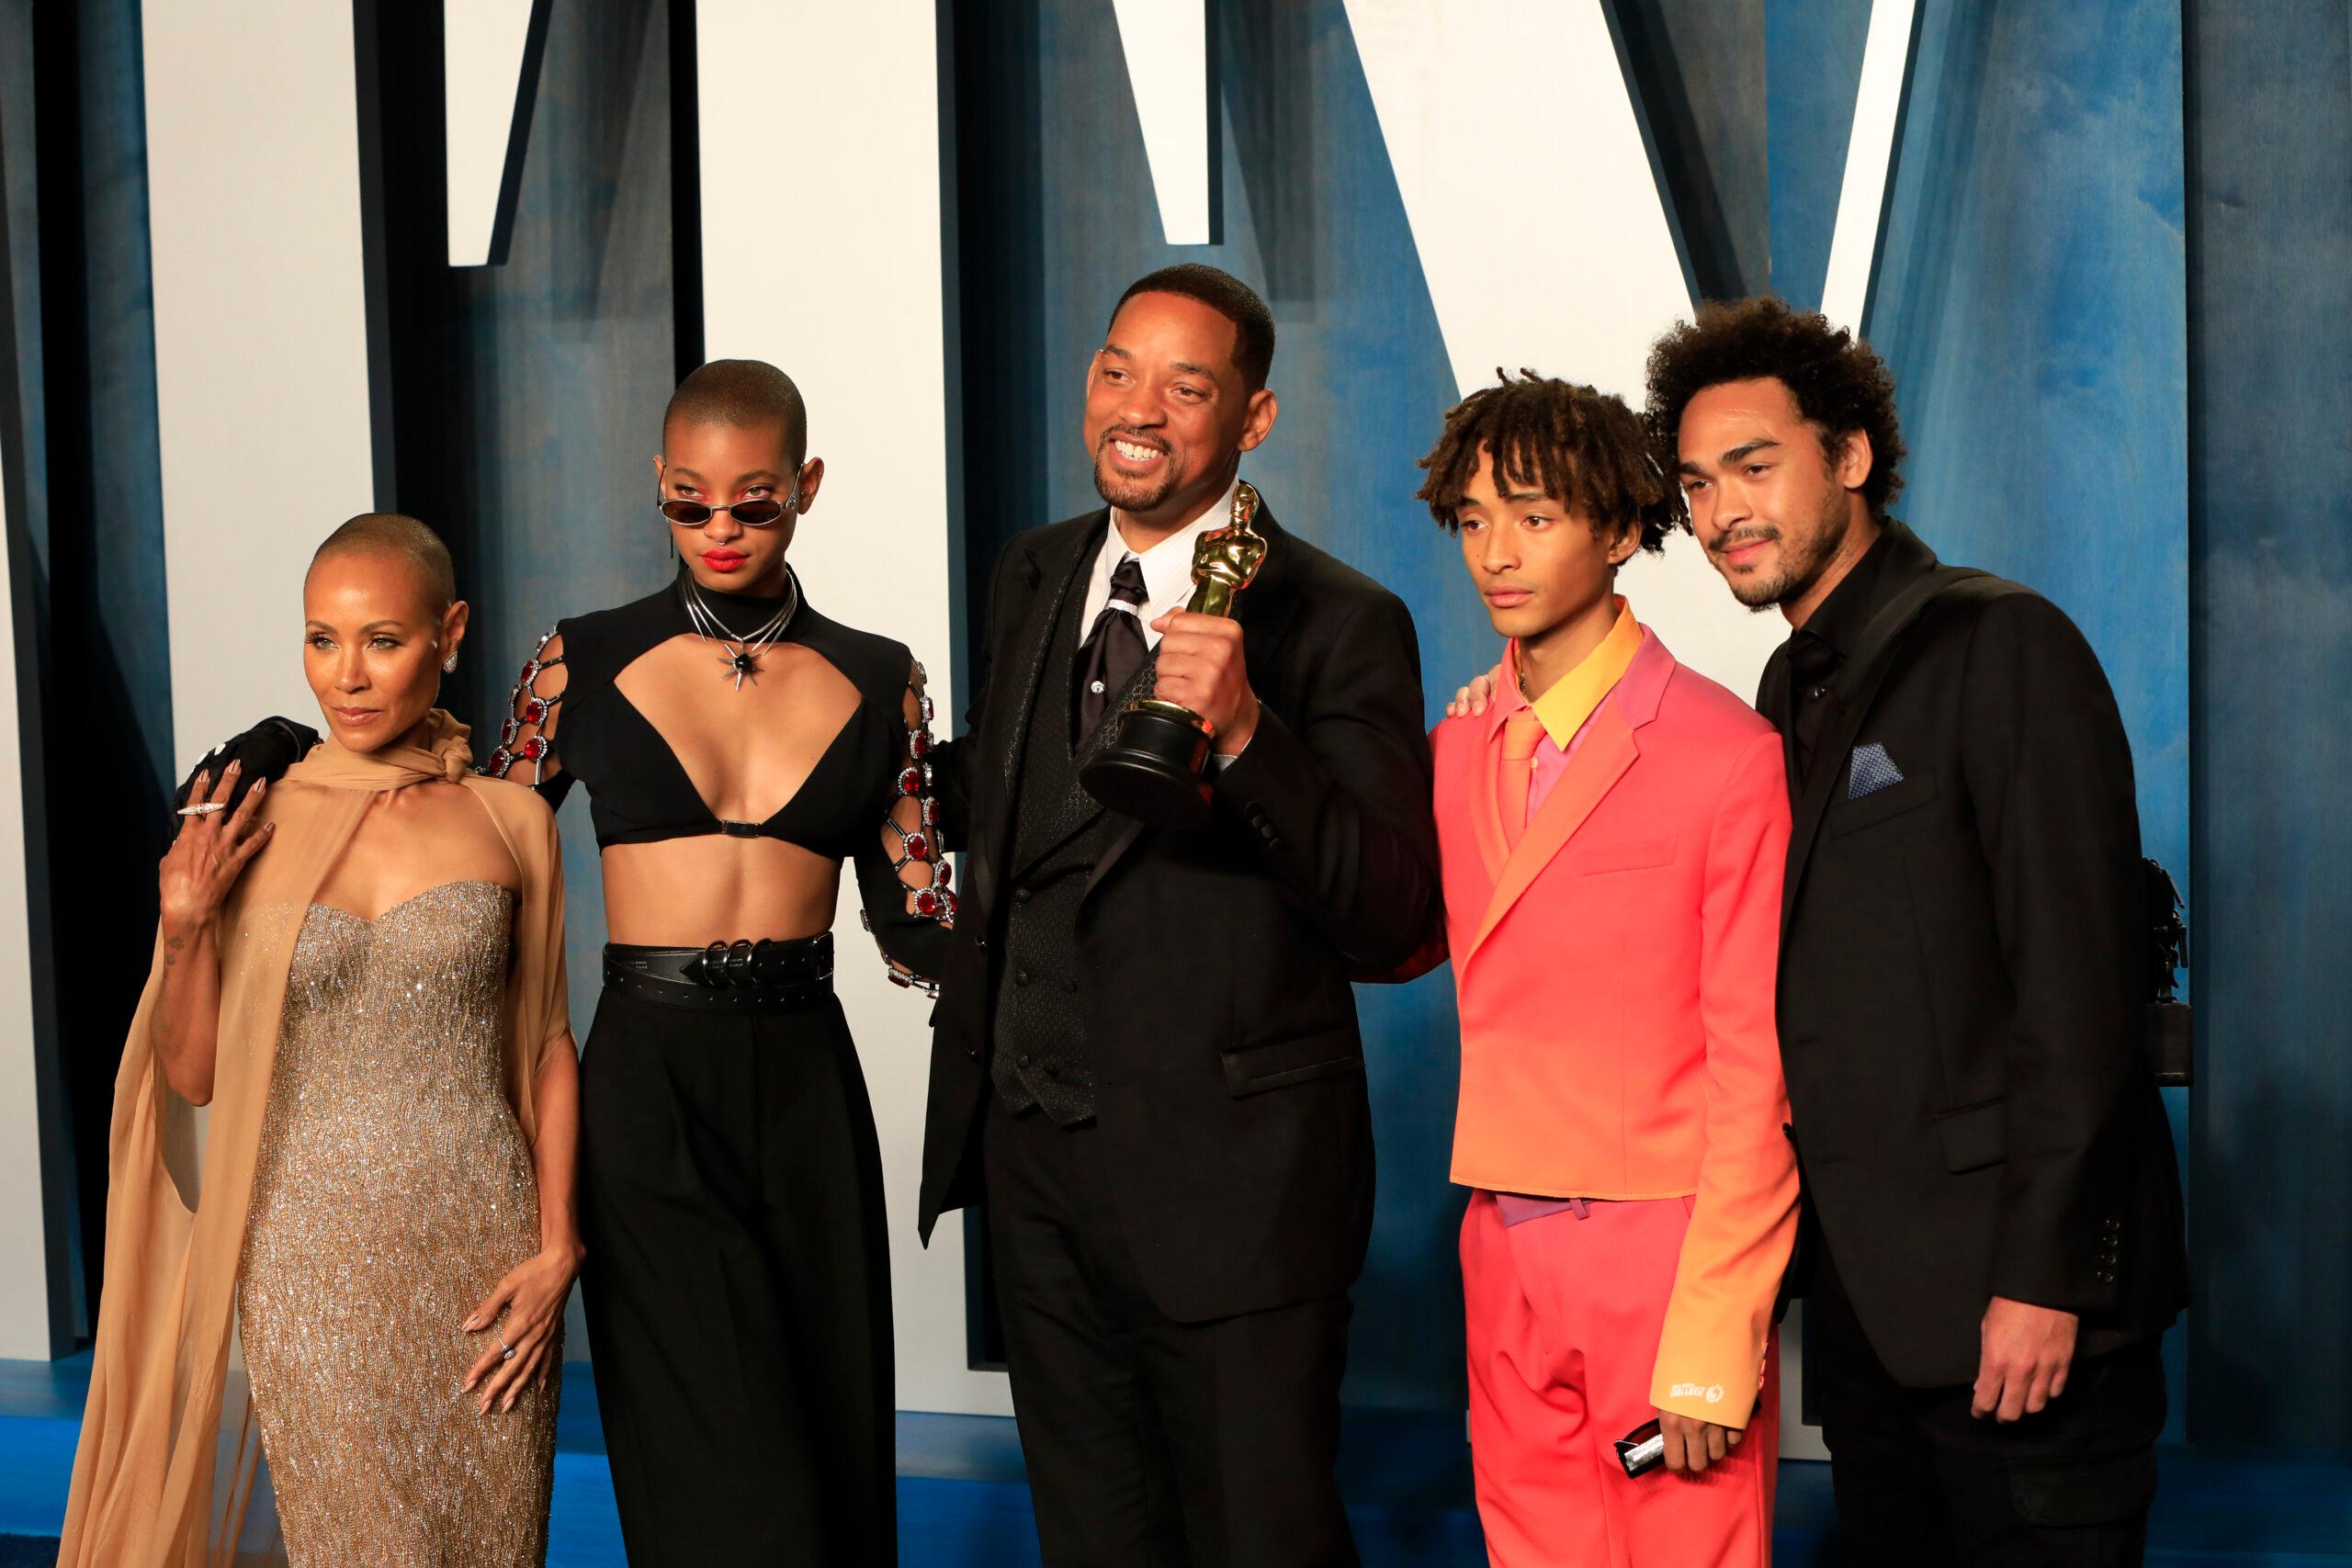 Jada Pinkett-Smith, Willow Smith, Will Smith, Jaden Smith, Trey Smith at the Vanity Fair Oscar Party at Wallis Annenberg Center for the Performing Arts on March 27, 2022